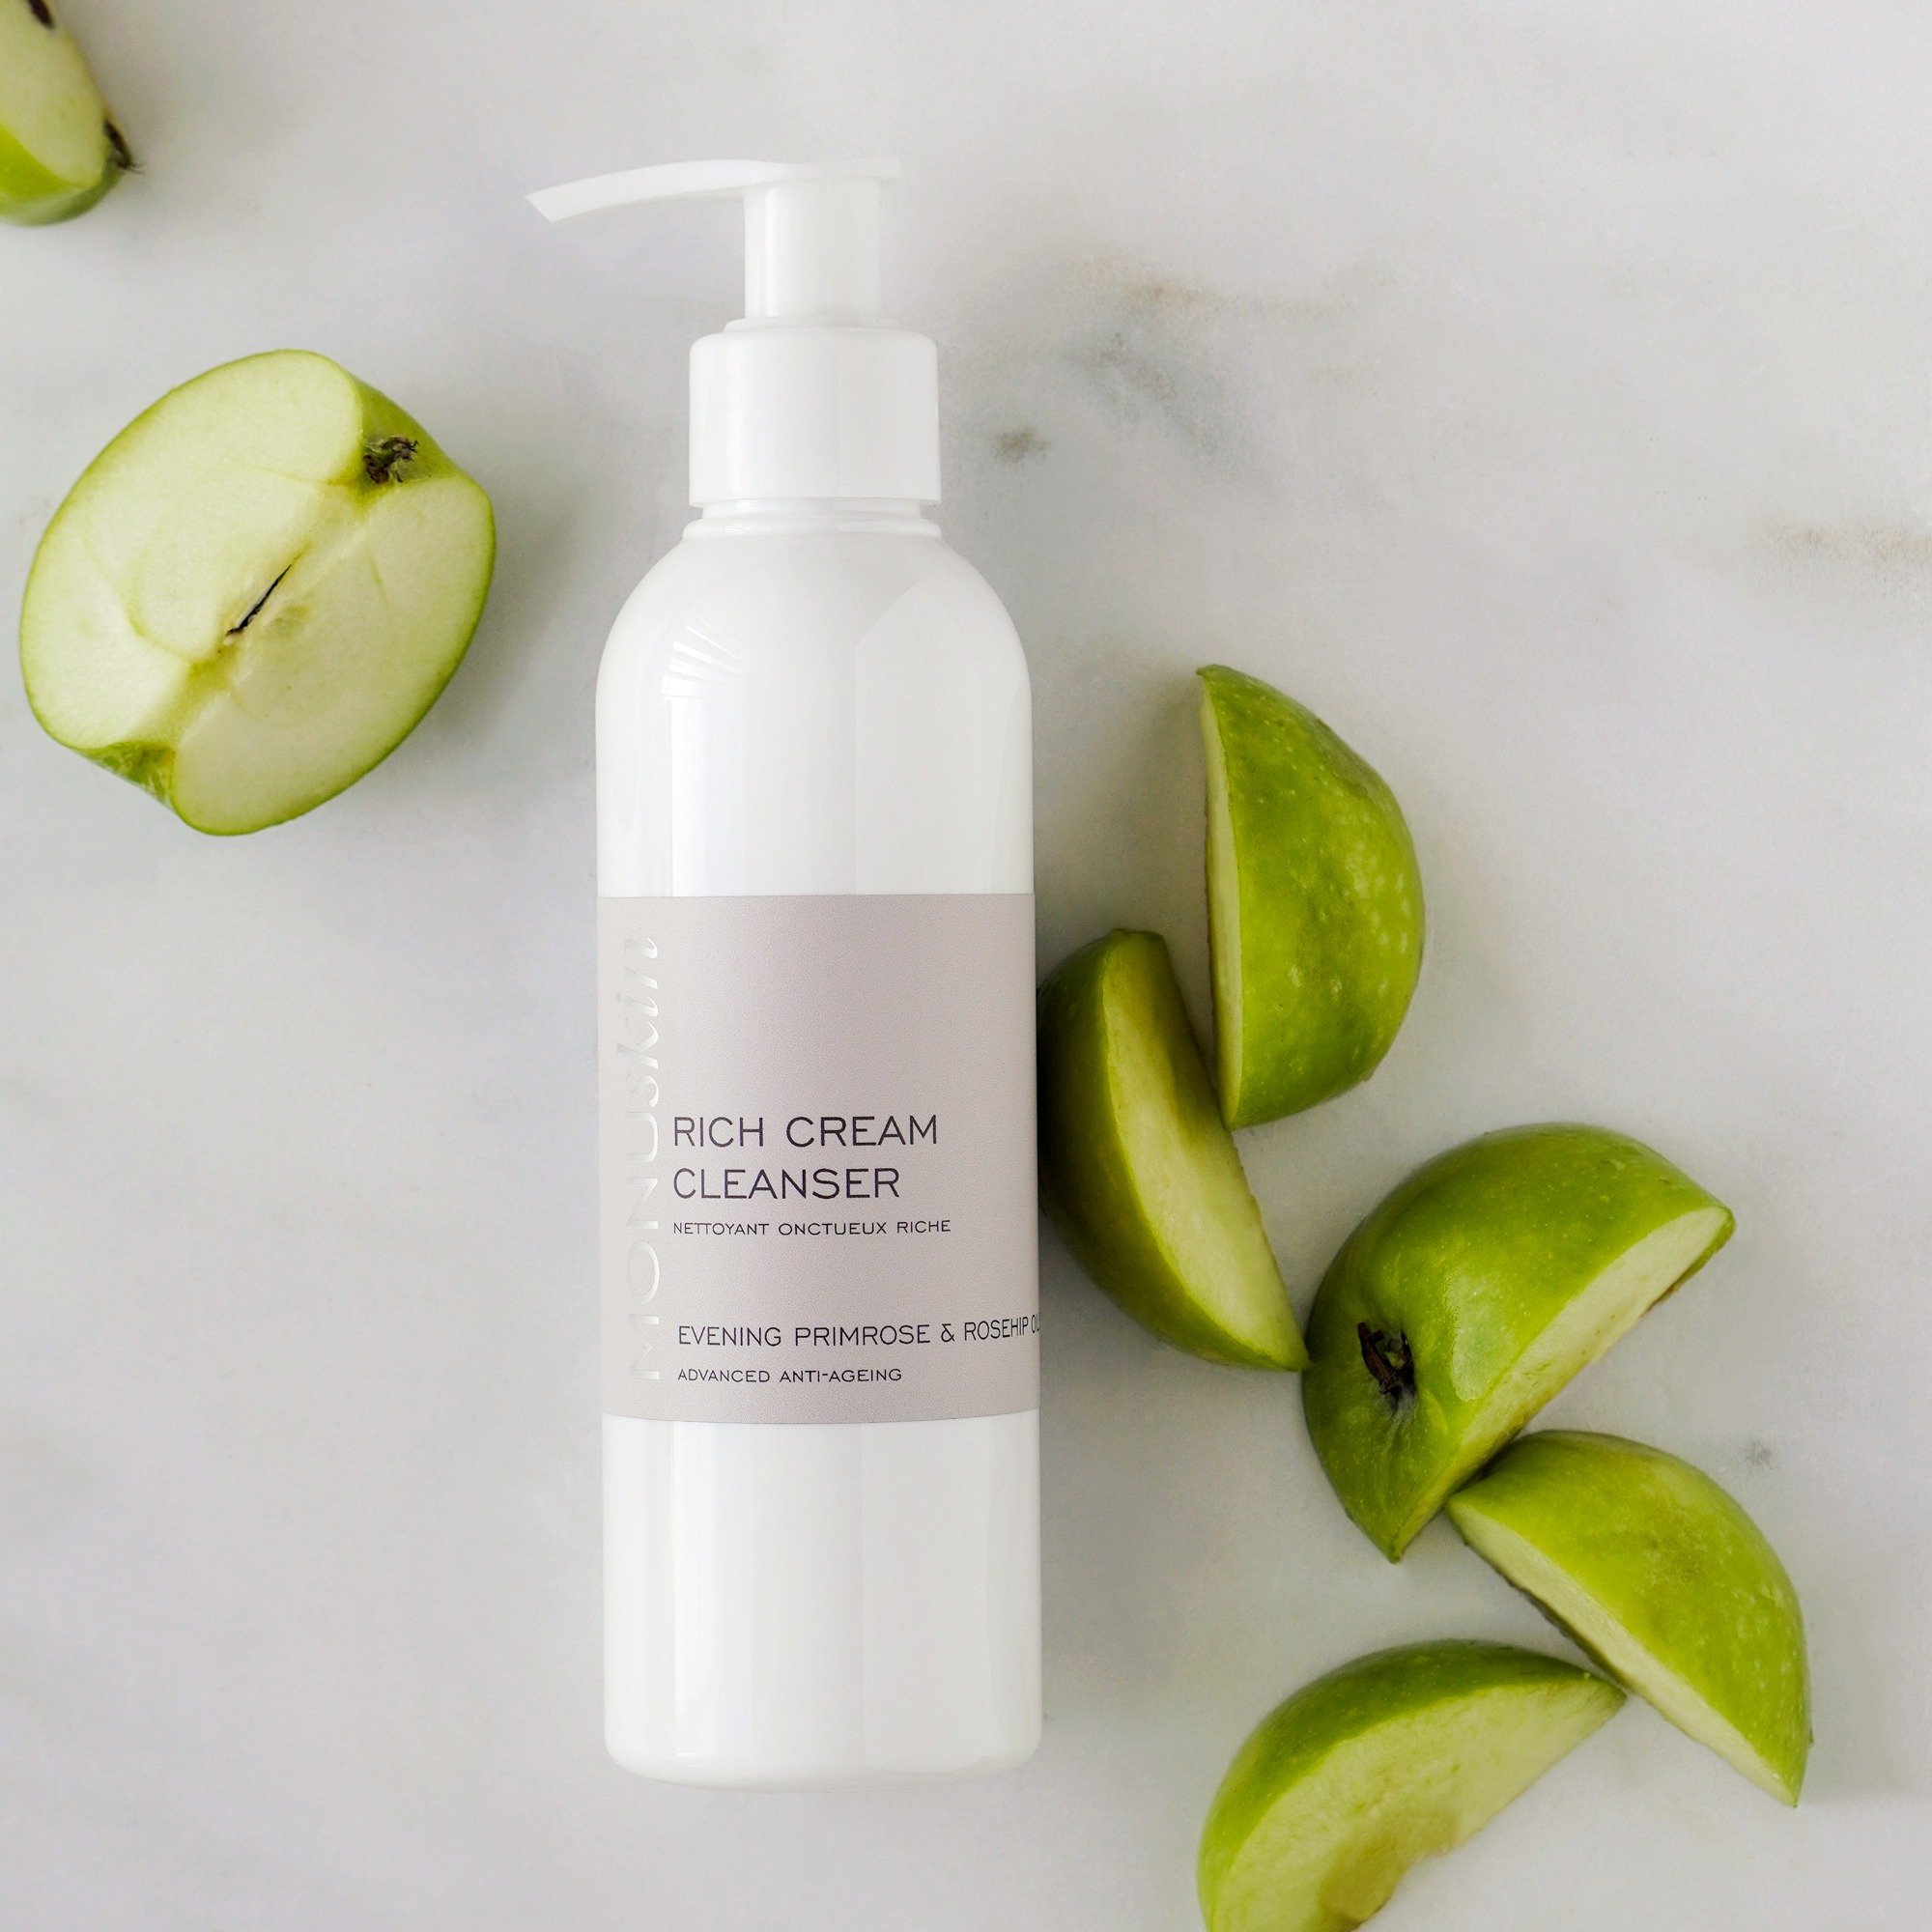 Clean, fresh, balanced skin- a gorgeous formulation of botanicals and actives to cleanse makeup, product build-up and daily impurities
Evening Primrose, Rosehip and Shea Butter to leave a radiant glow.....🌟

#richcreamcleanser #cleansingcream #monus